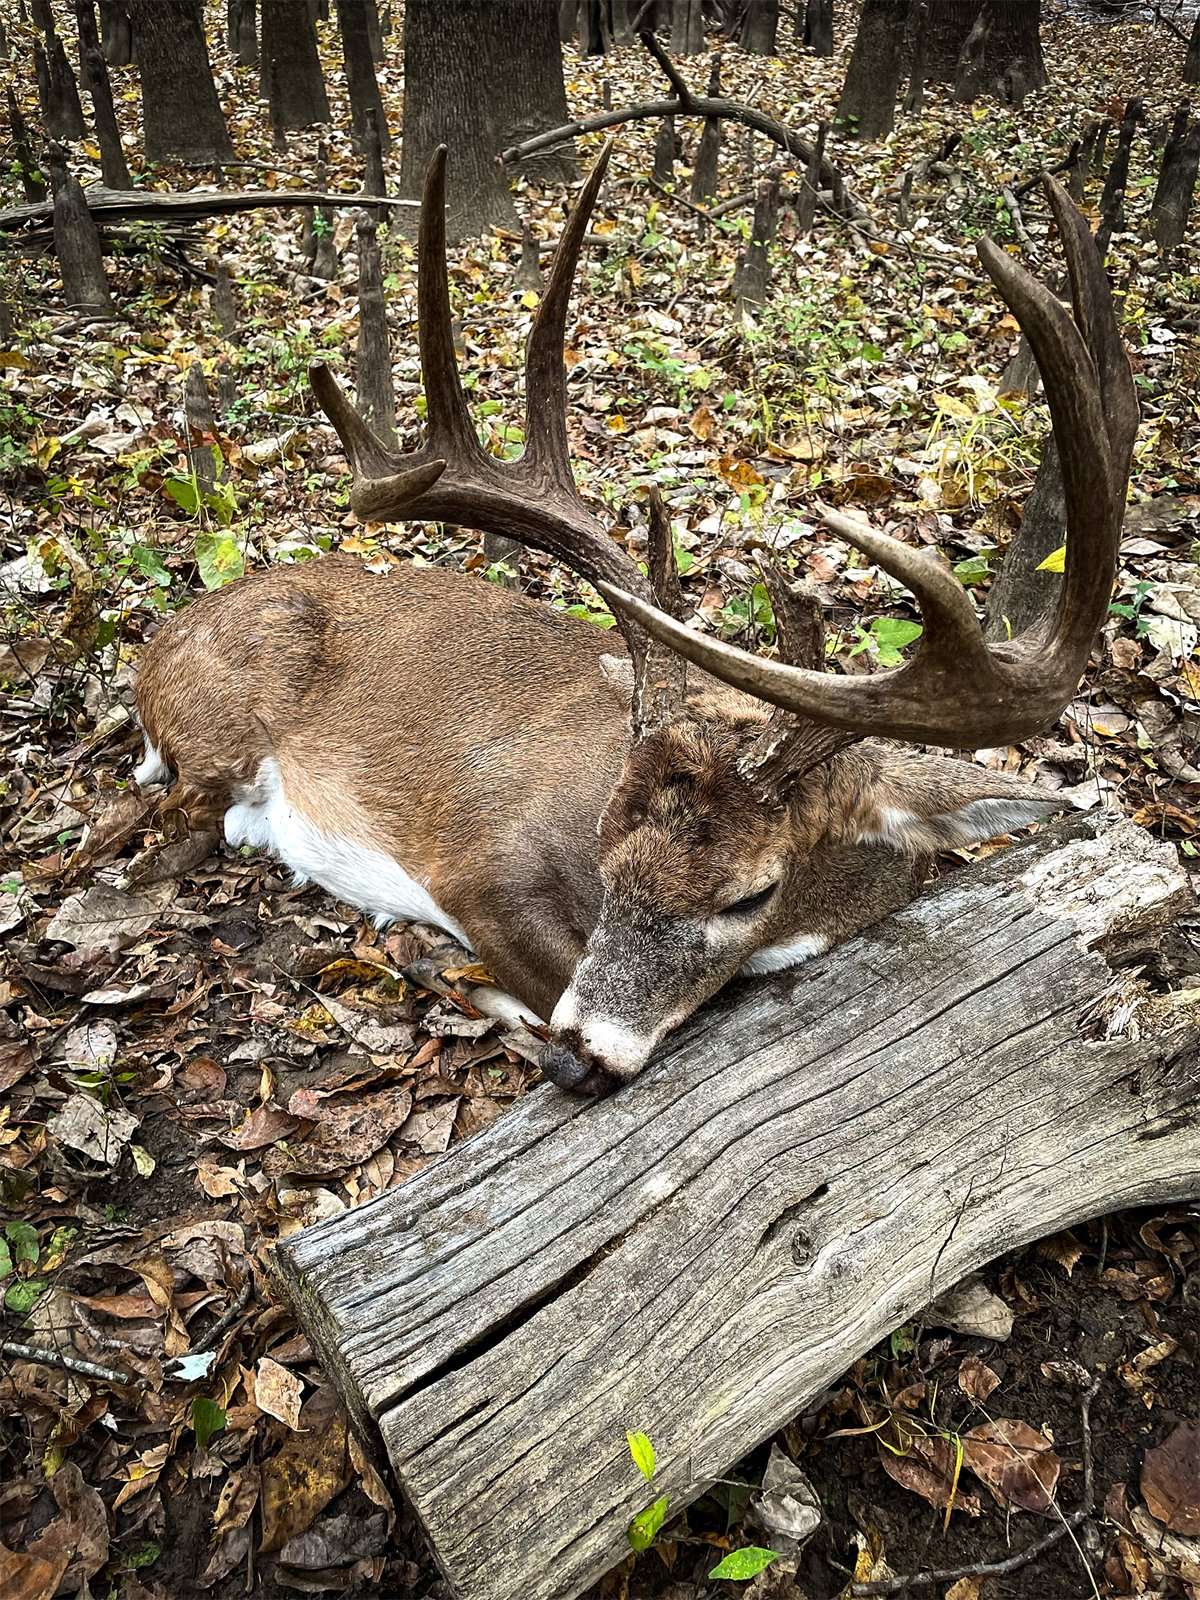 Robertson decided to play a trick on the landowner, and pretended to have shot a younger deer. Image by Buck Commander